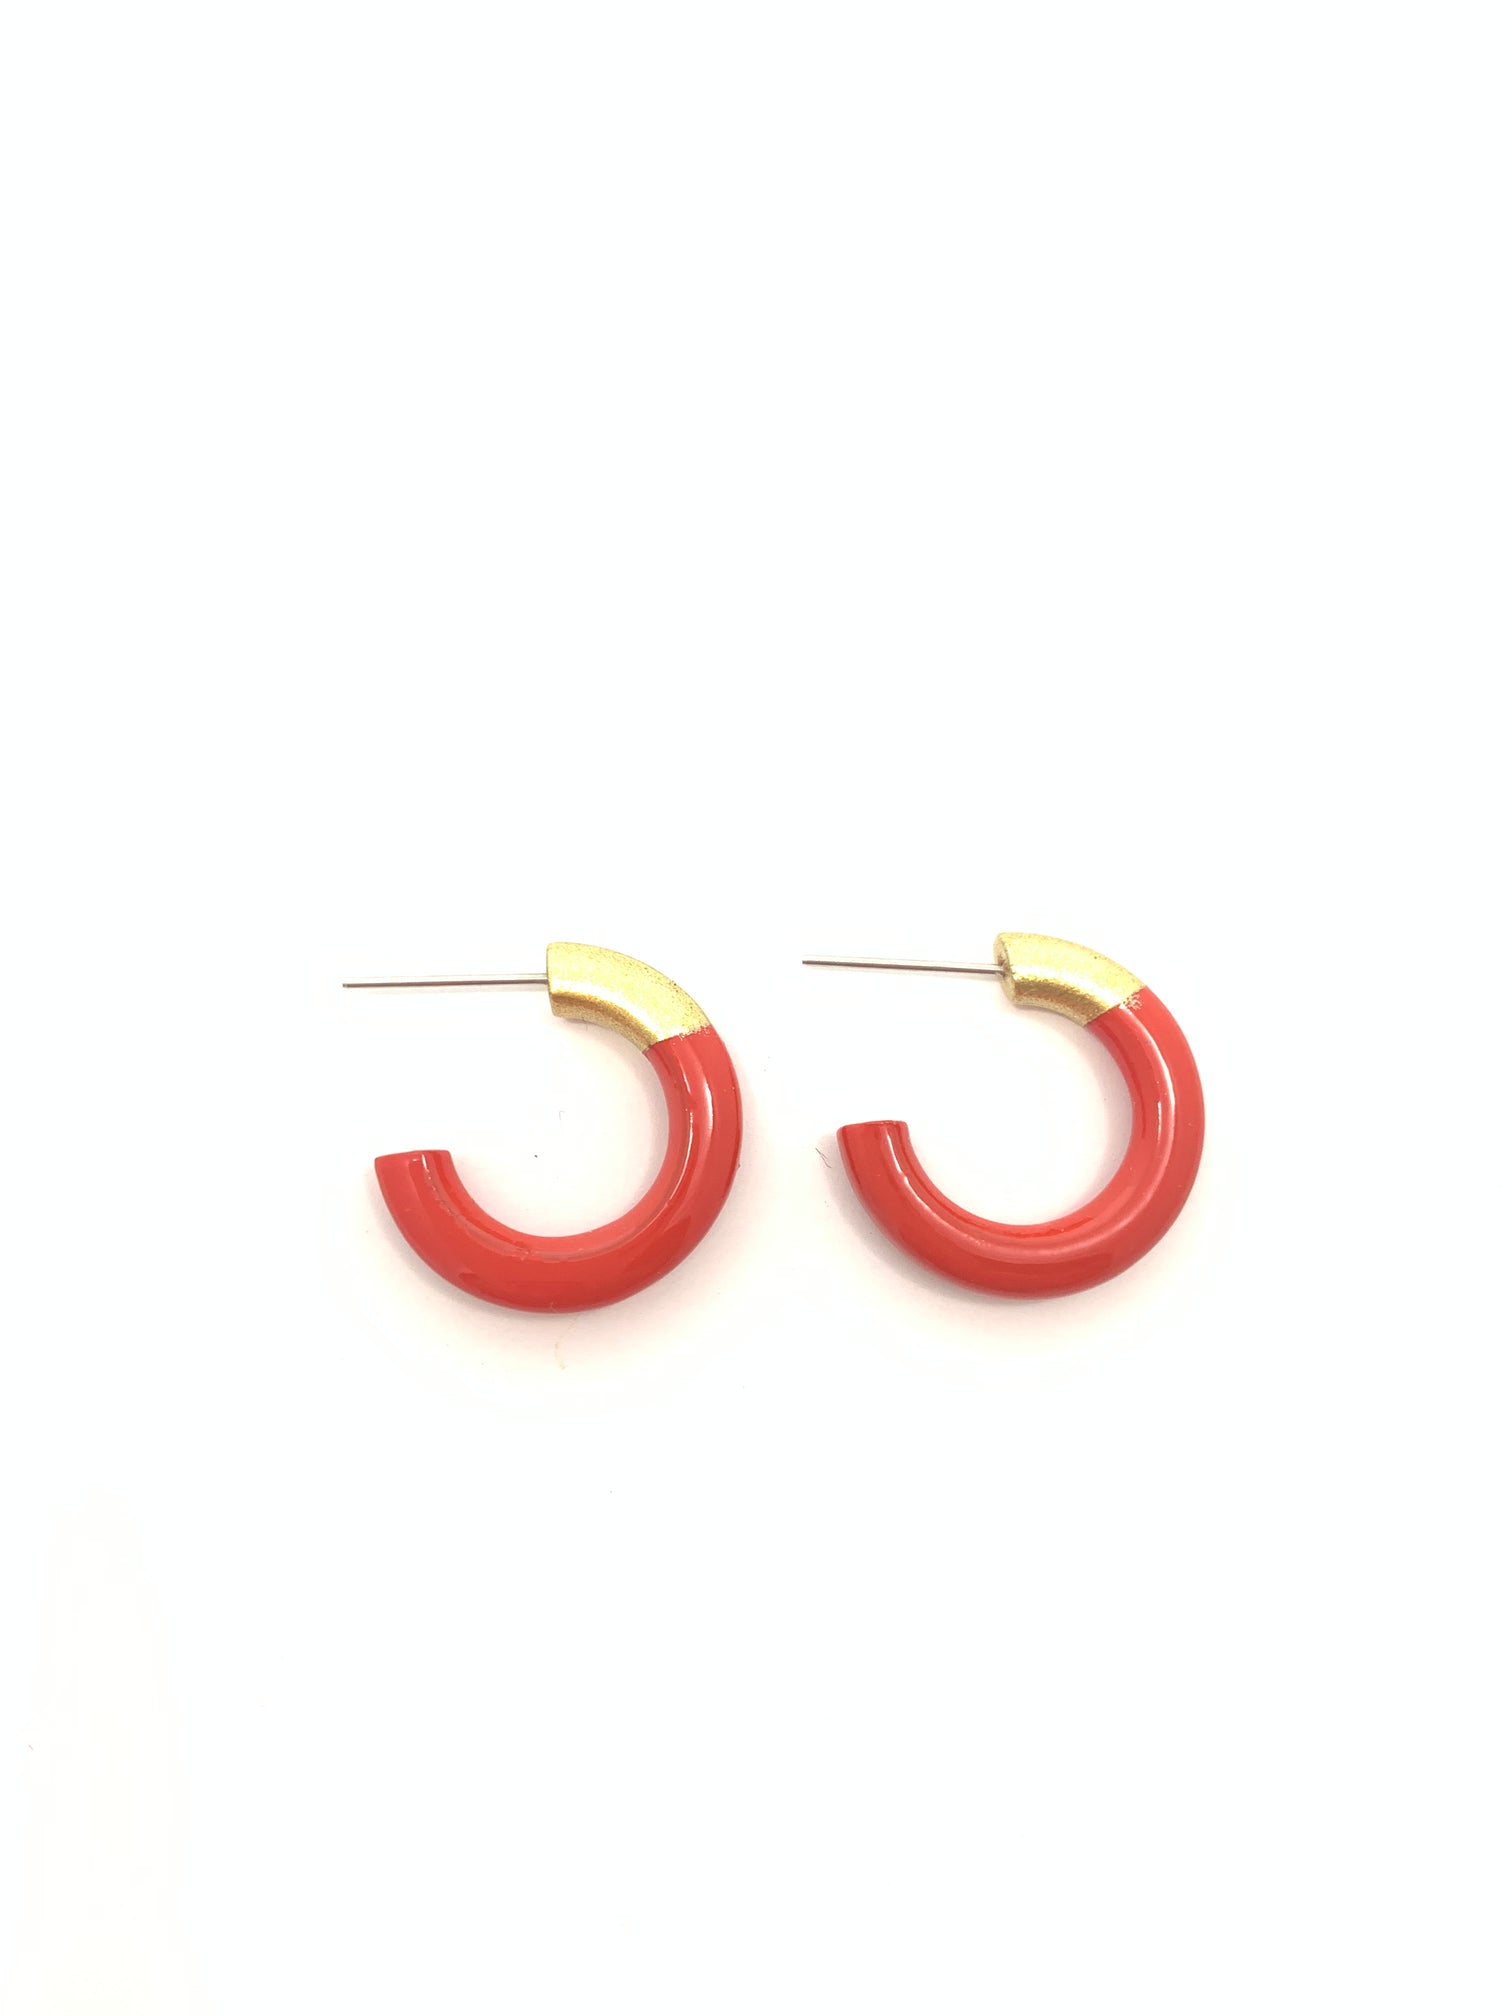 Liz Small Hoops in Tomato Red